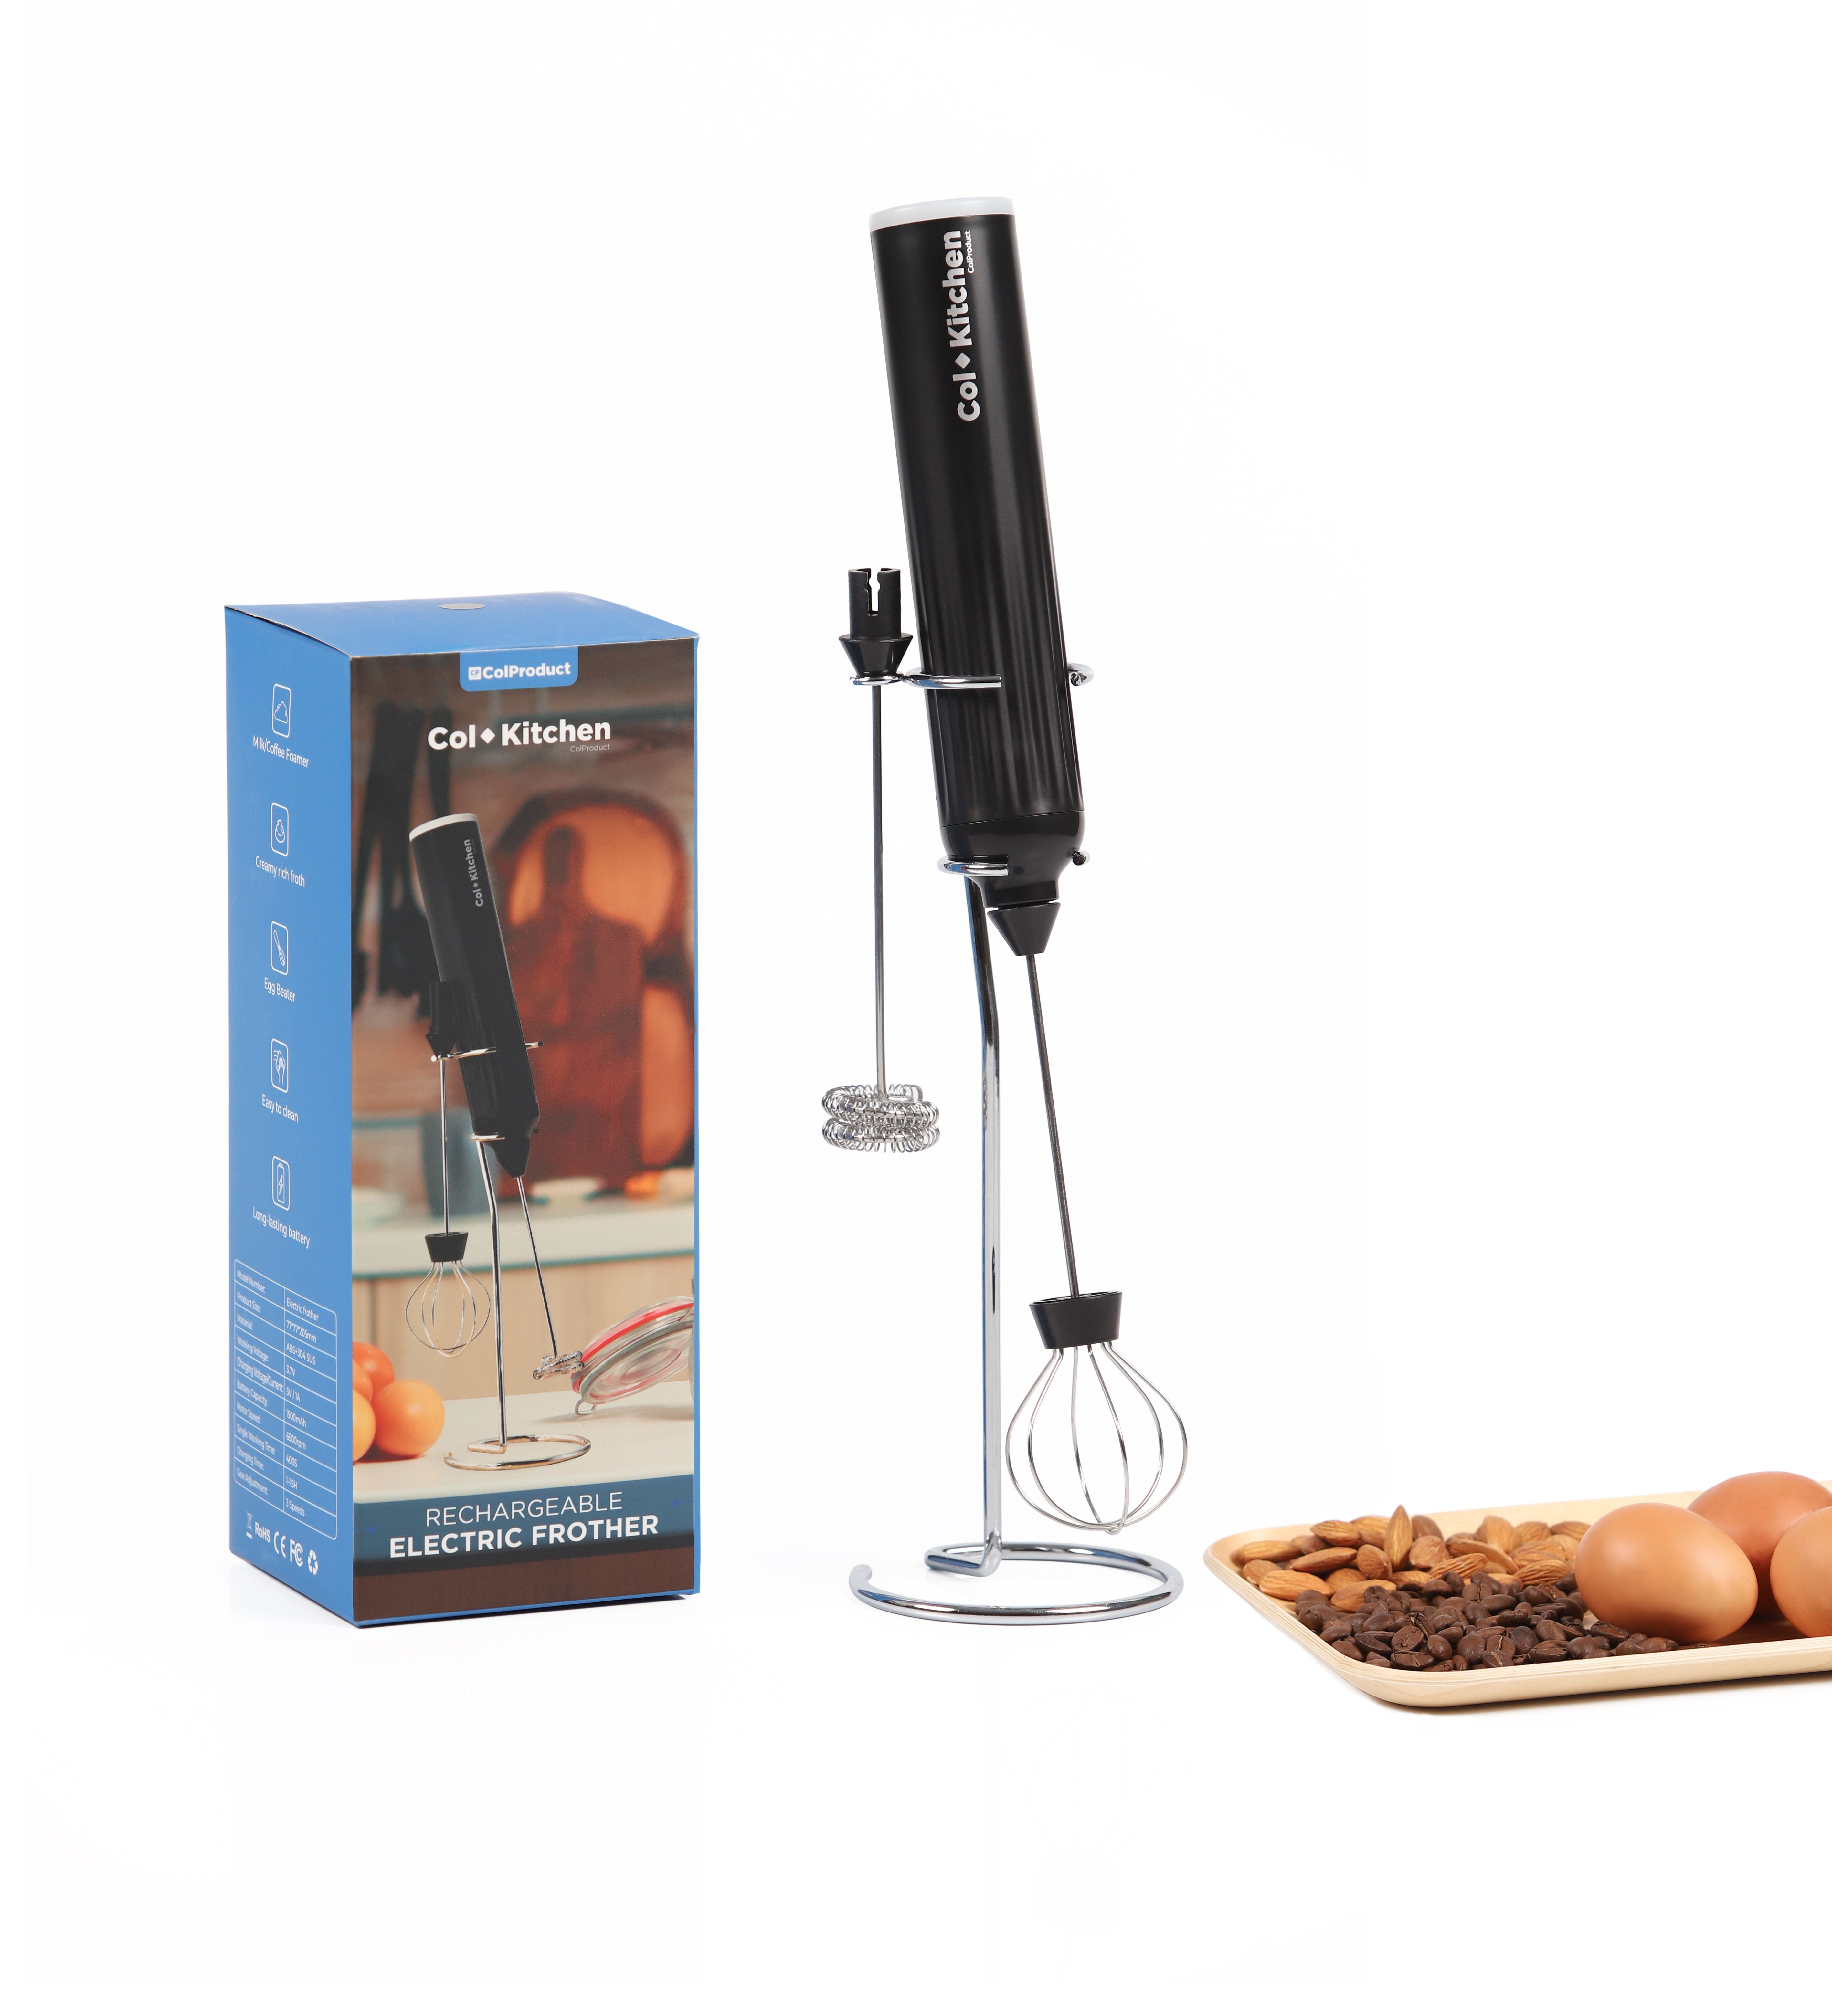 Aerolatte Black Milk Frother with Stand